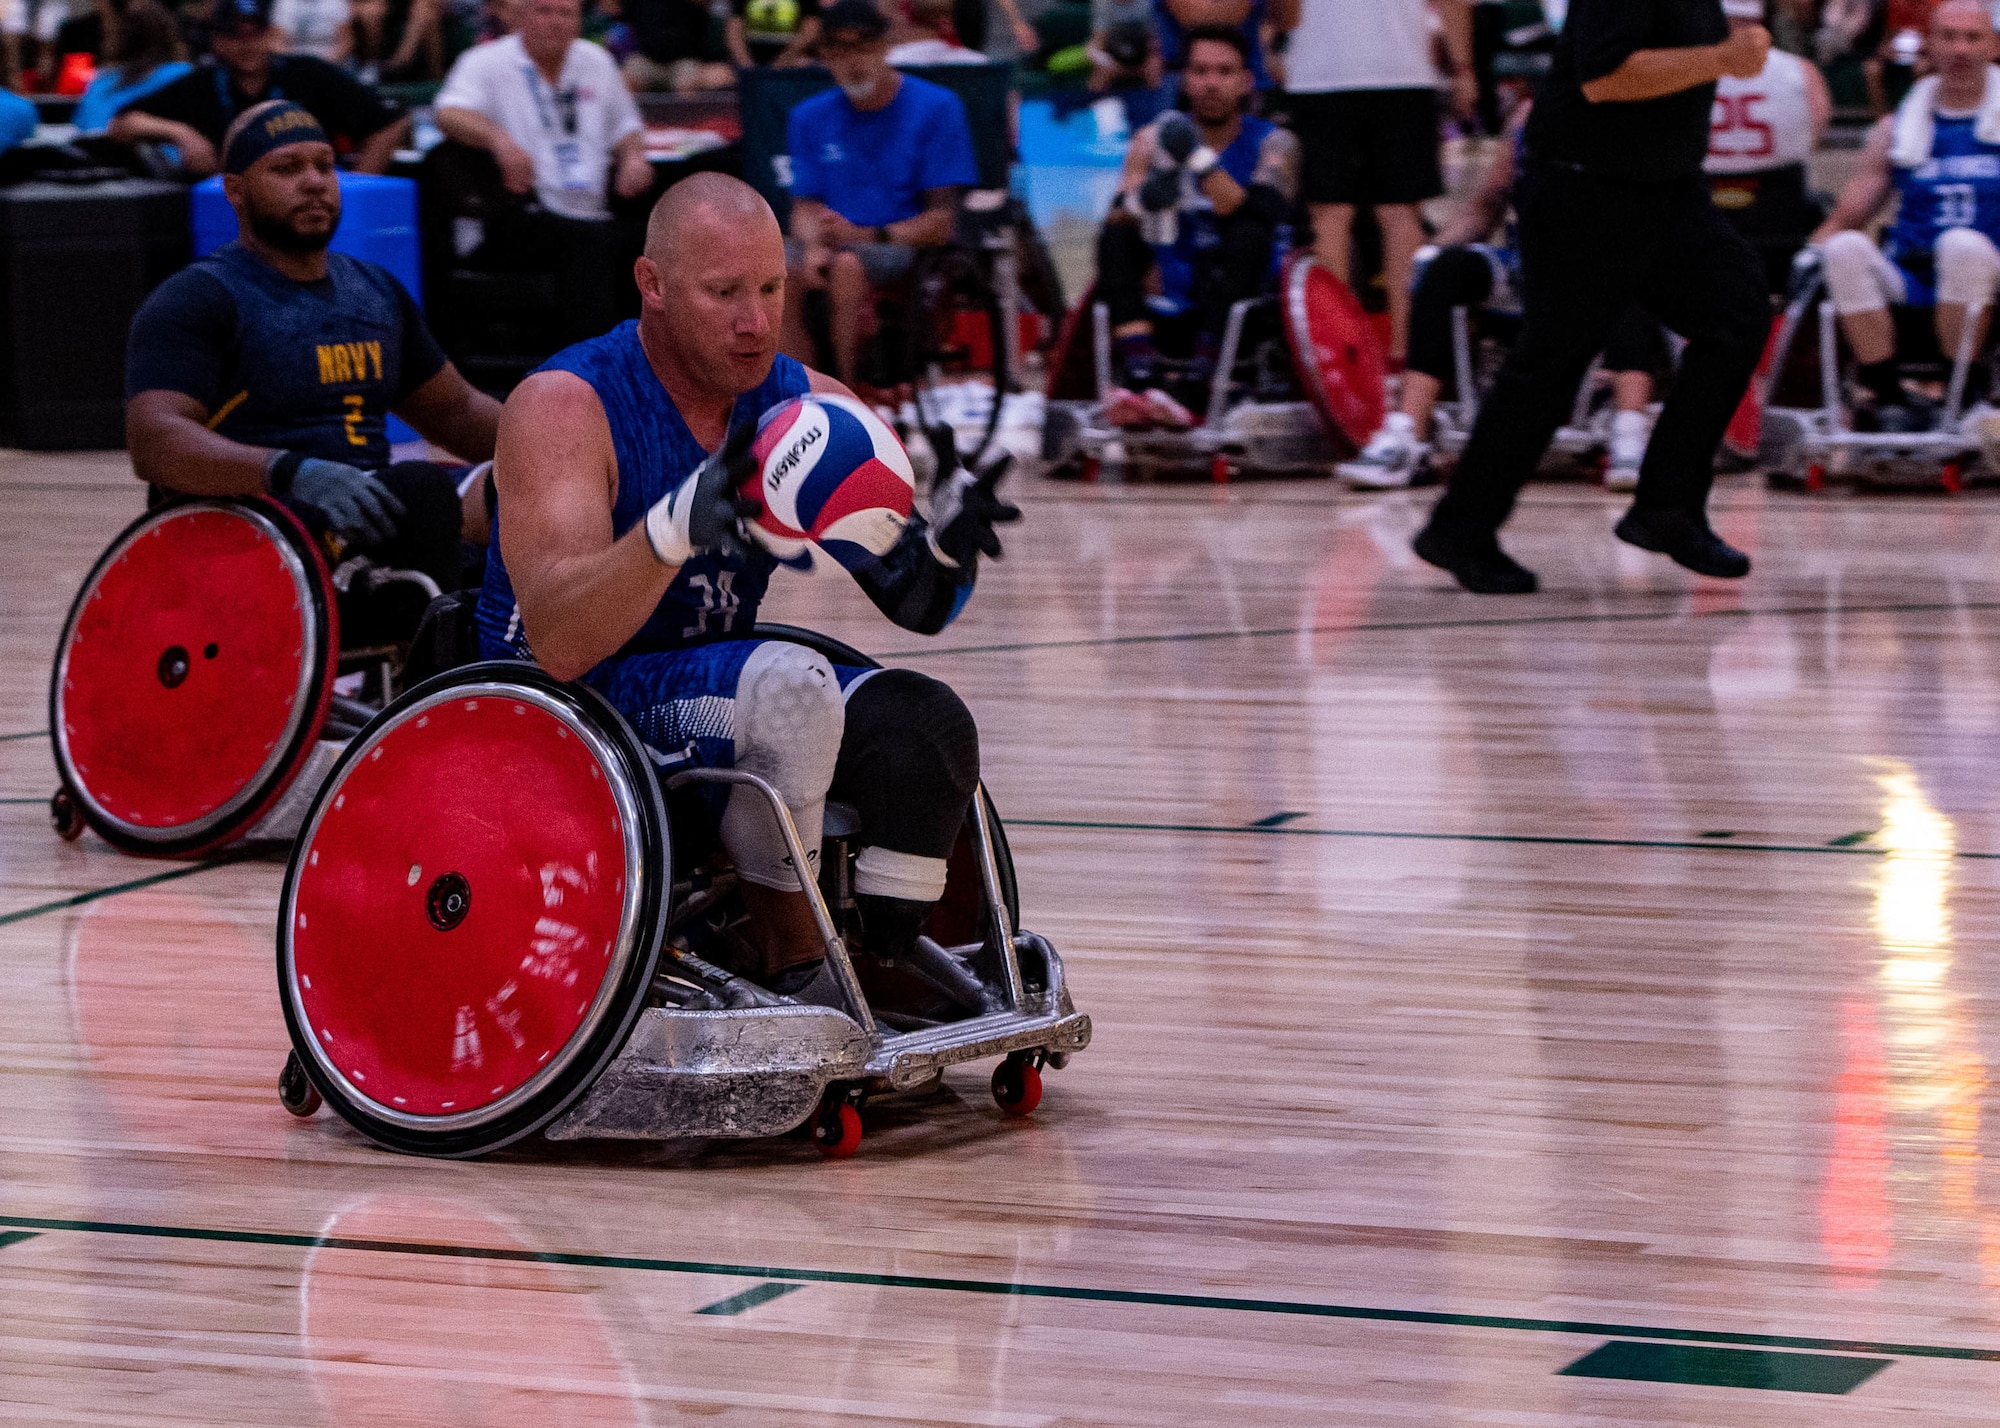 U.S. Air Force Senior MSgt. Benjamin Seekell, a Team Air Force Warrior Games athlete, catches the ball during a wheelchair rugby game at the 2022 Department of Defense Warrior Games, August 21st, 2022, in Orlando, Florida.